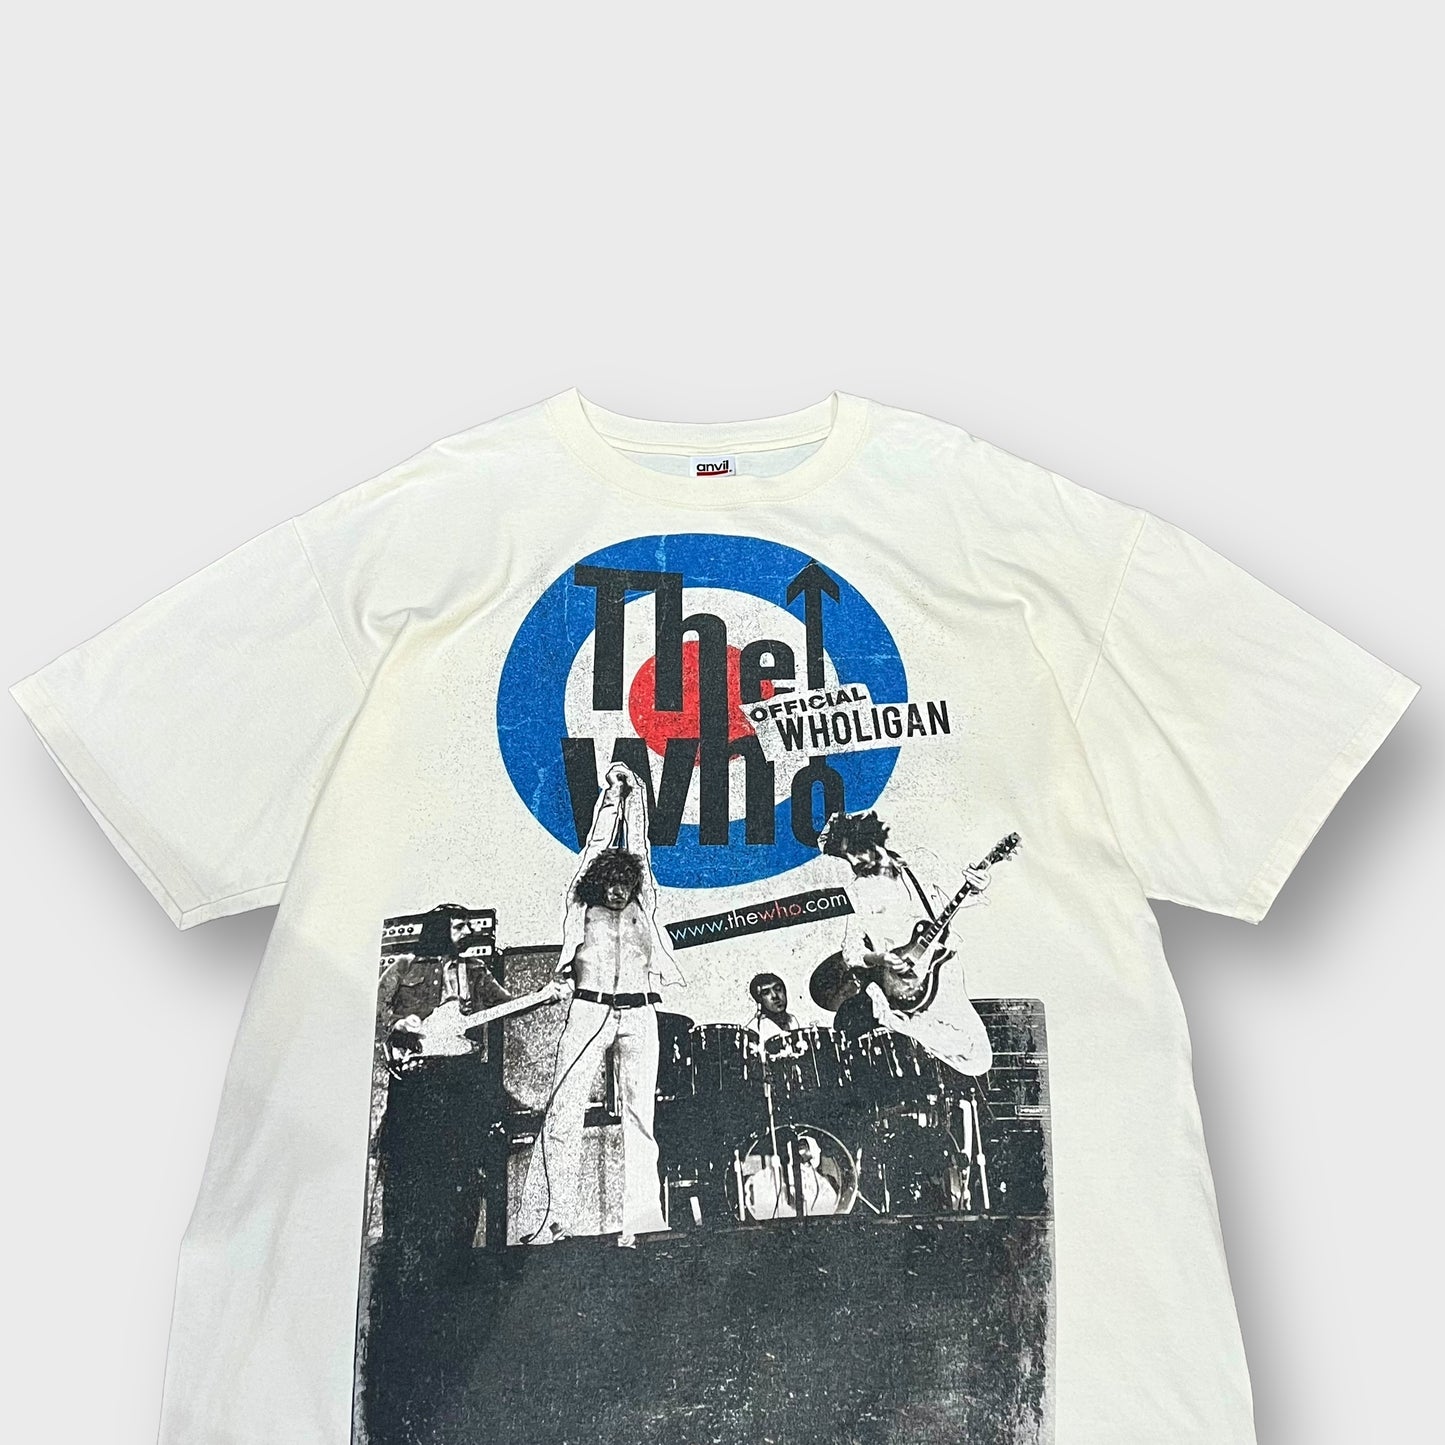 00’s “The who” band t-shirt